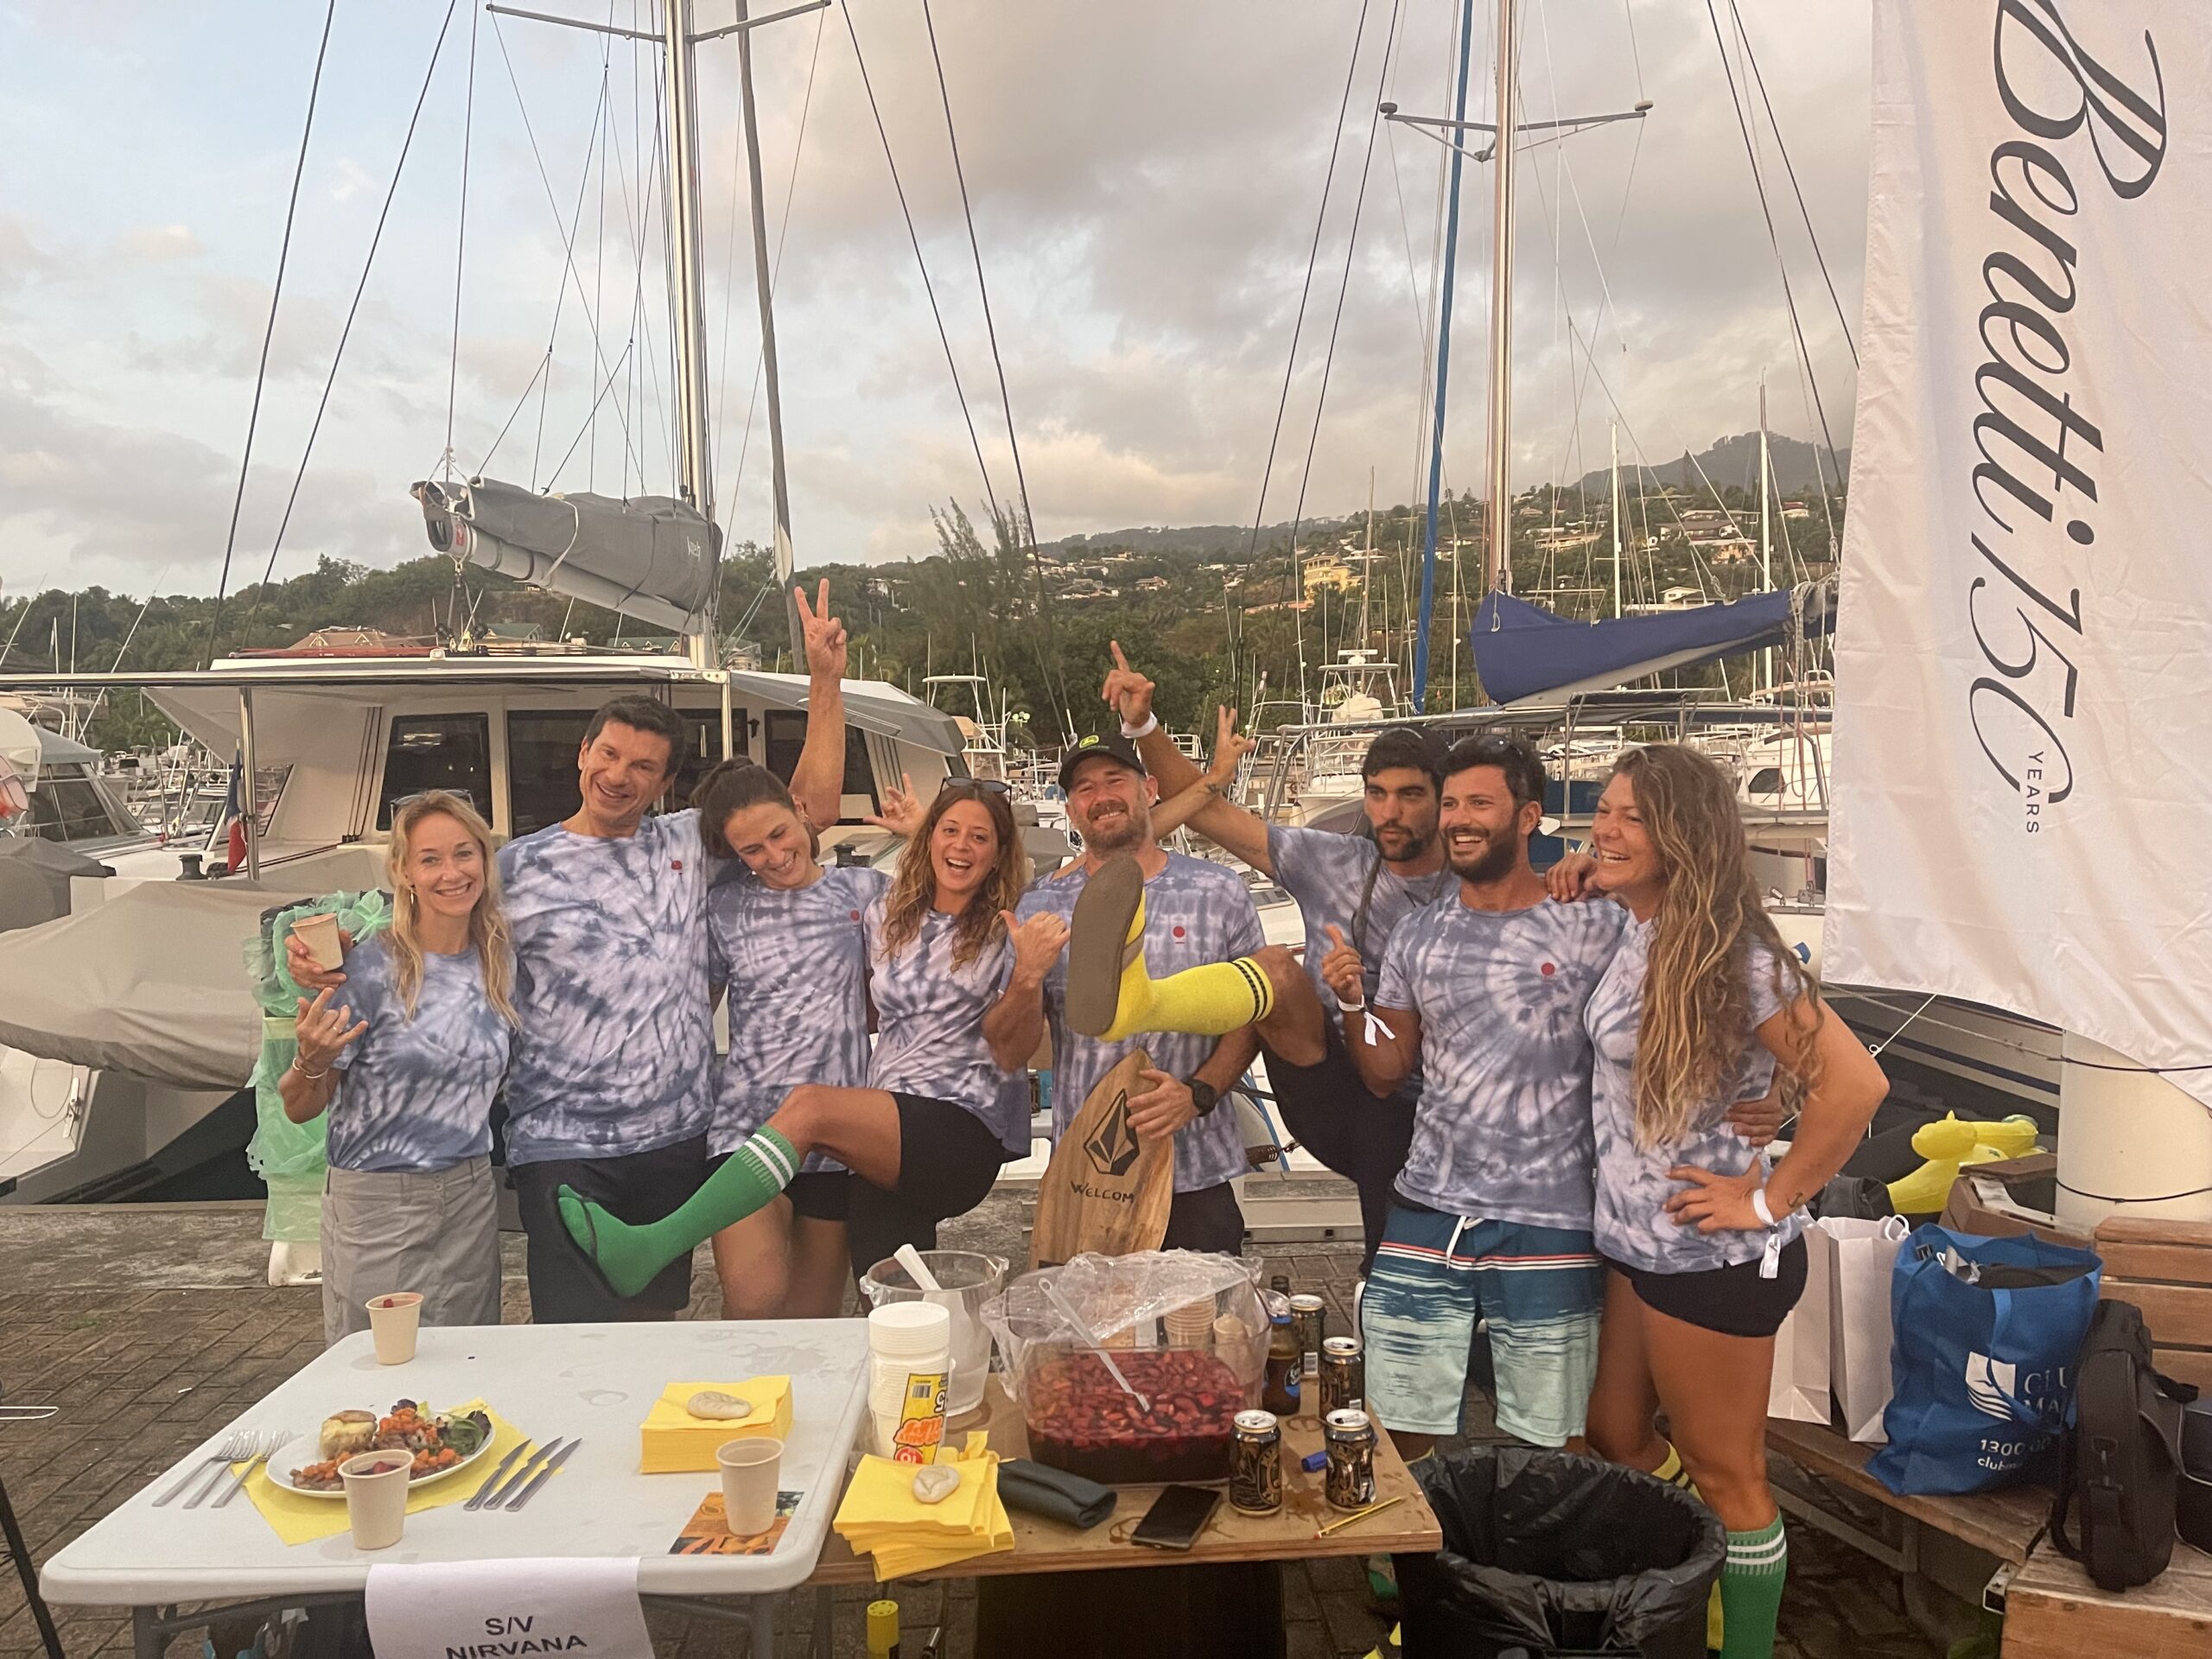 Cooking Competition – SY Nirvana Formentera Crew, best entertainment